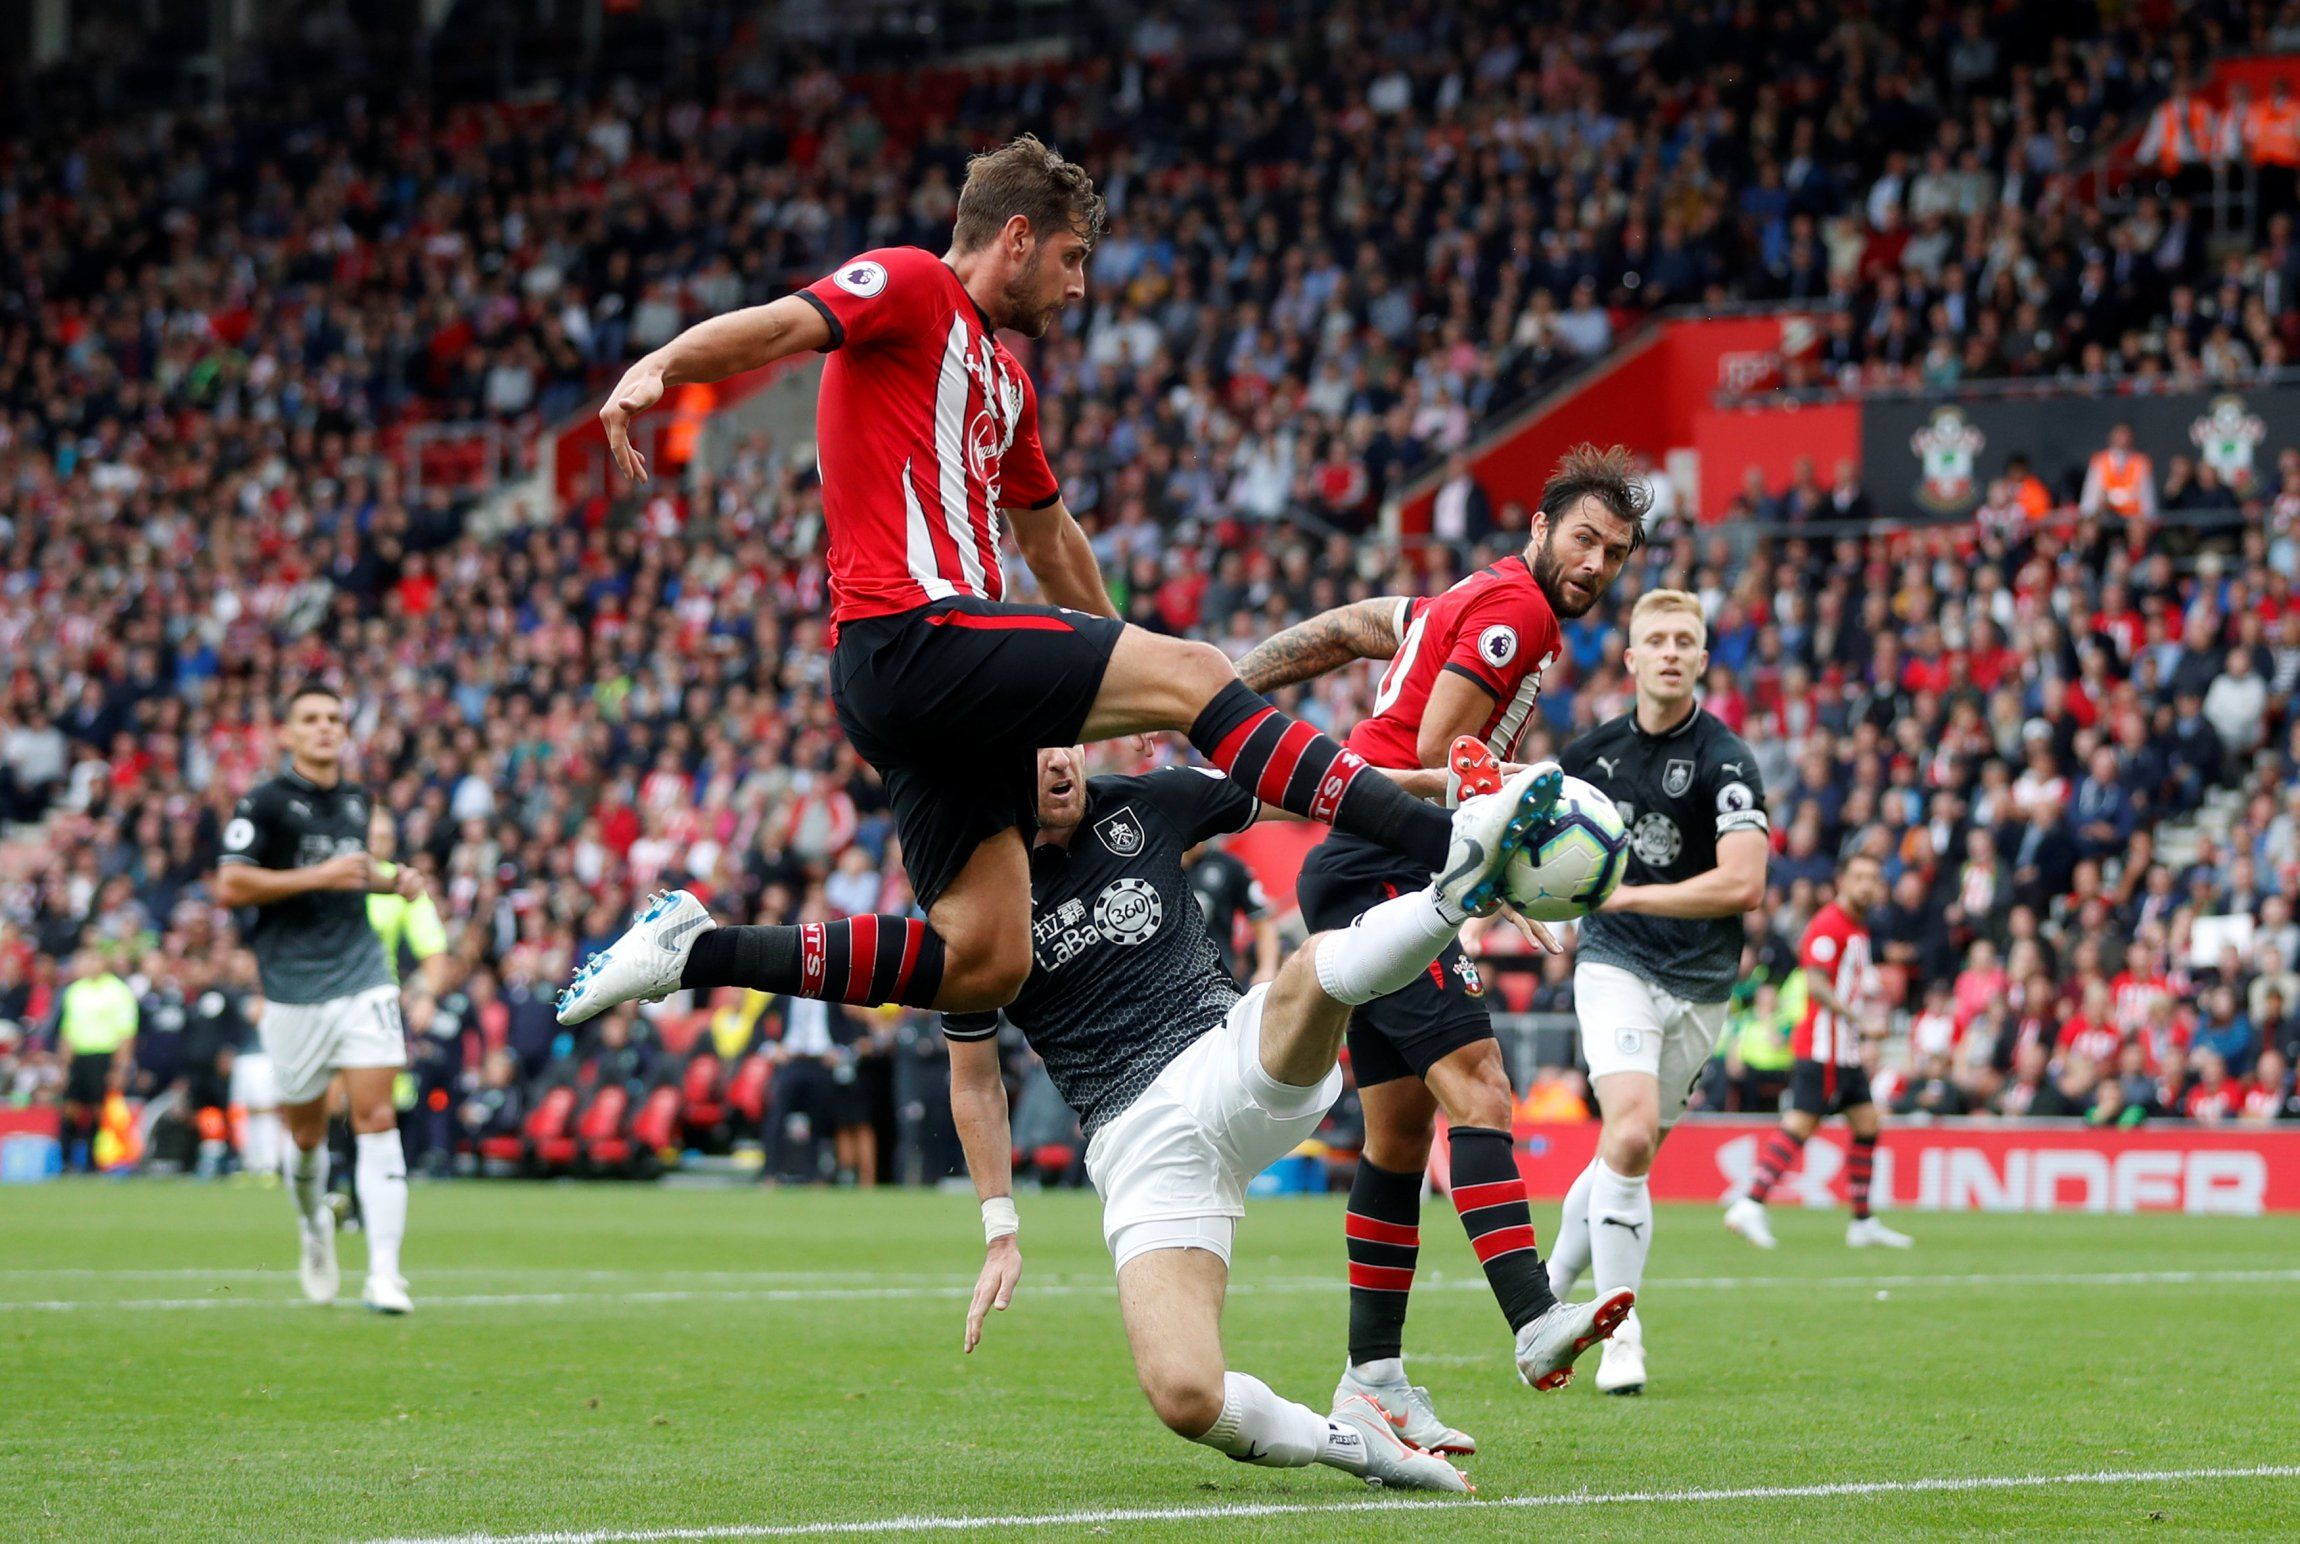 Jack Stephens has a chance to score in Southampton draw with Burnley